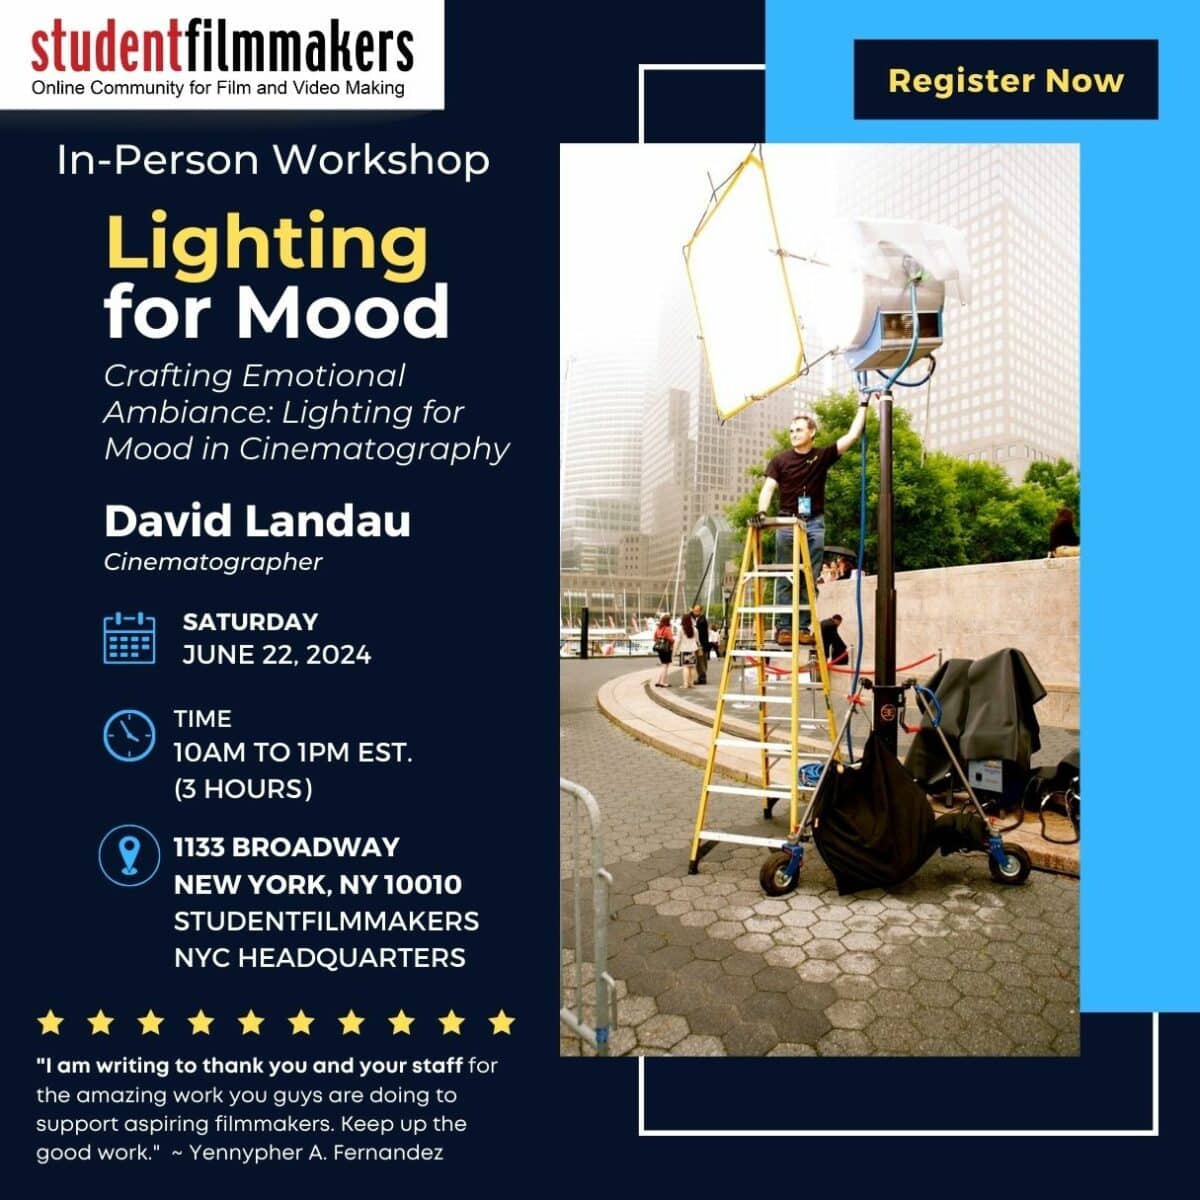 StudentFilmmakers.com In-Person Workshop - Lighting for Mood: Crafting Emotional Ambiance: Lighting for Mood in Cinematography Led by David Landau Date: Saturday, June 22, 2024 Time: 10am to 1pm Duration: 3 hours. Location: 1133 Broadway, New York, NY 10010